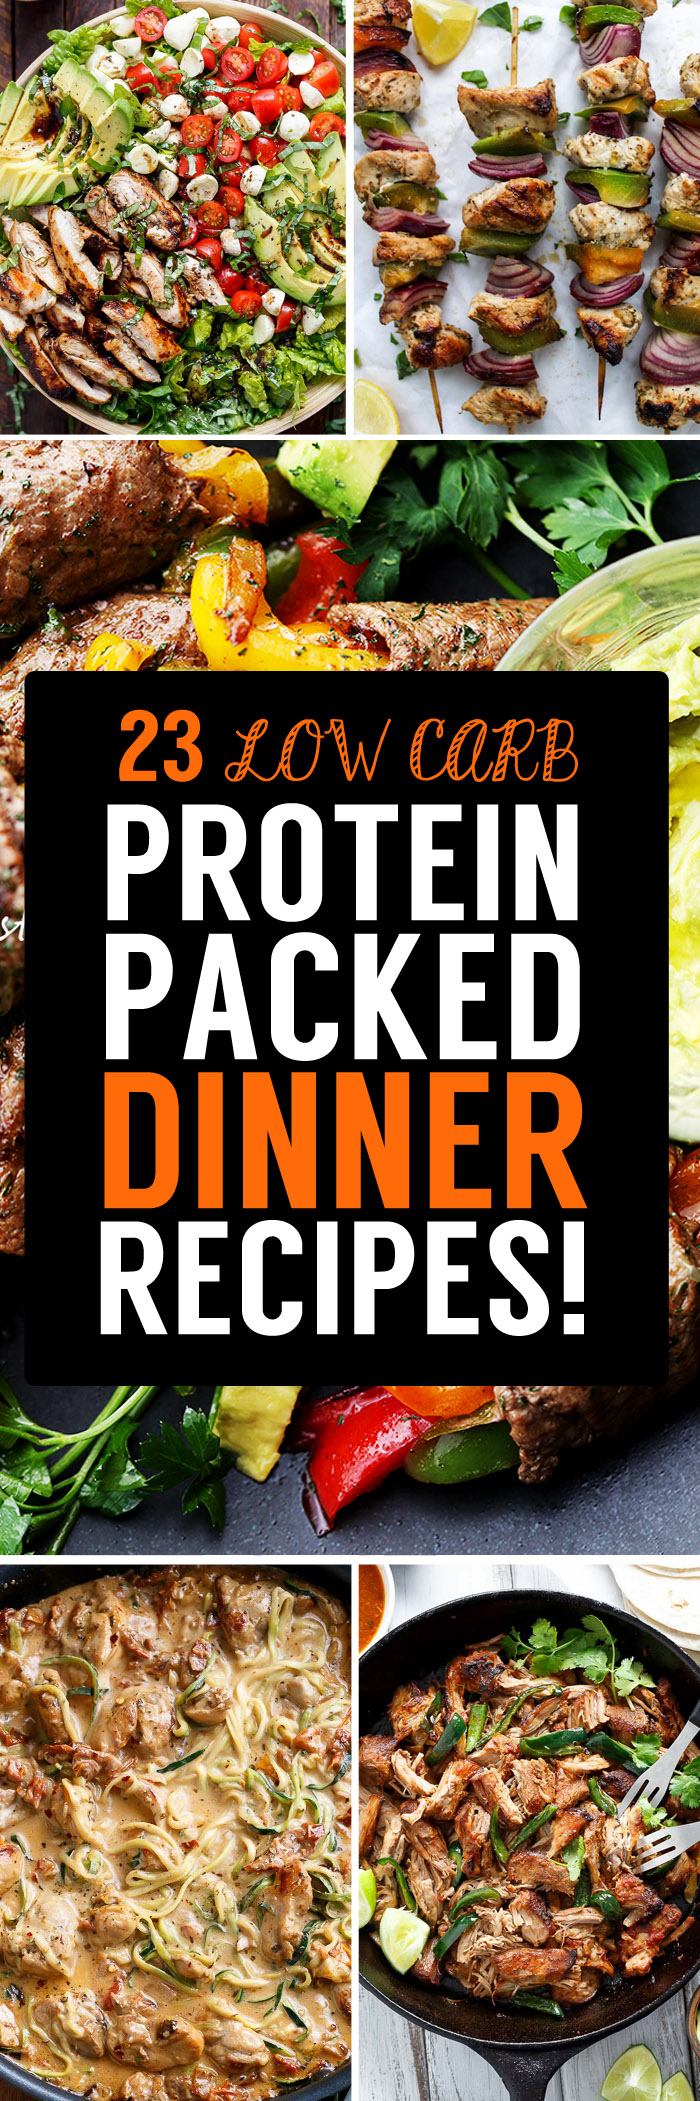 Low Carb High Protein Meals Uk - ProteinWalls